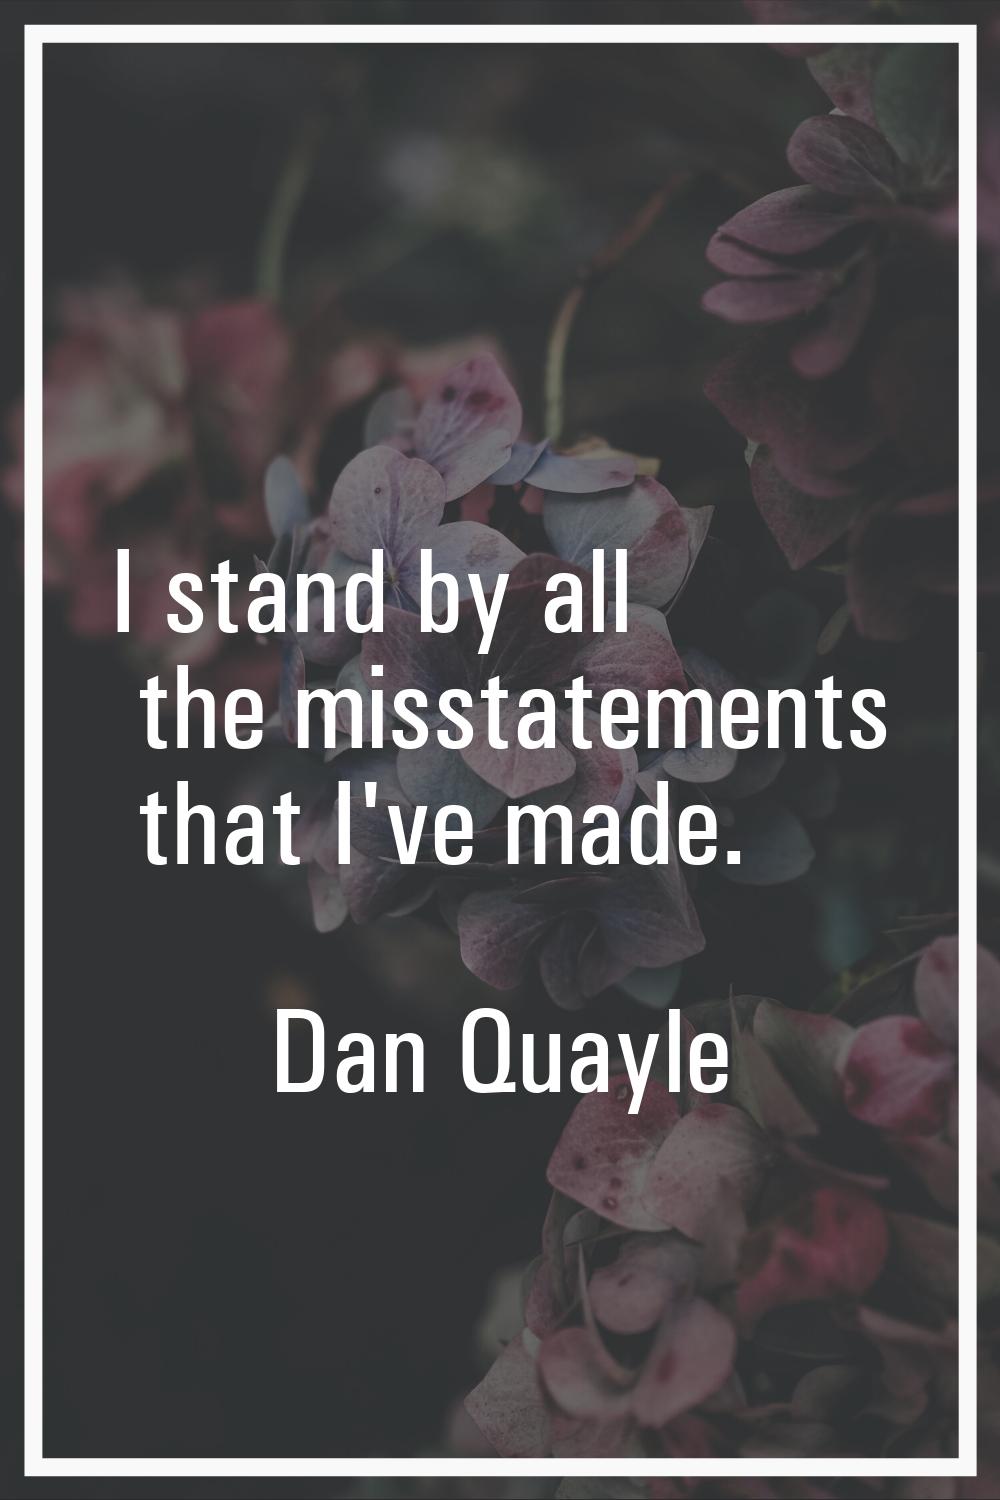 I stand by all the misstatements that I've made.